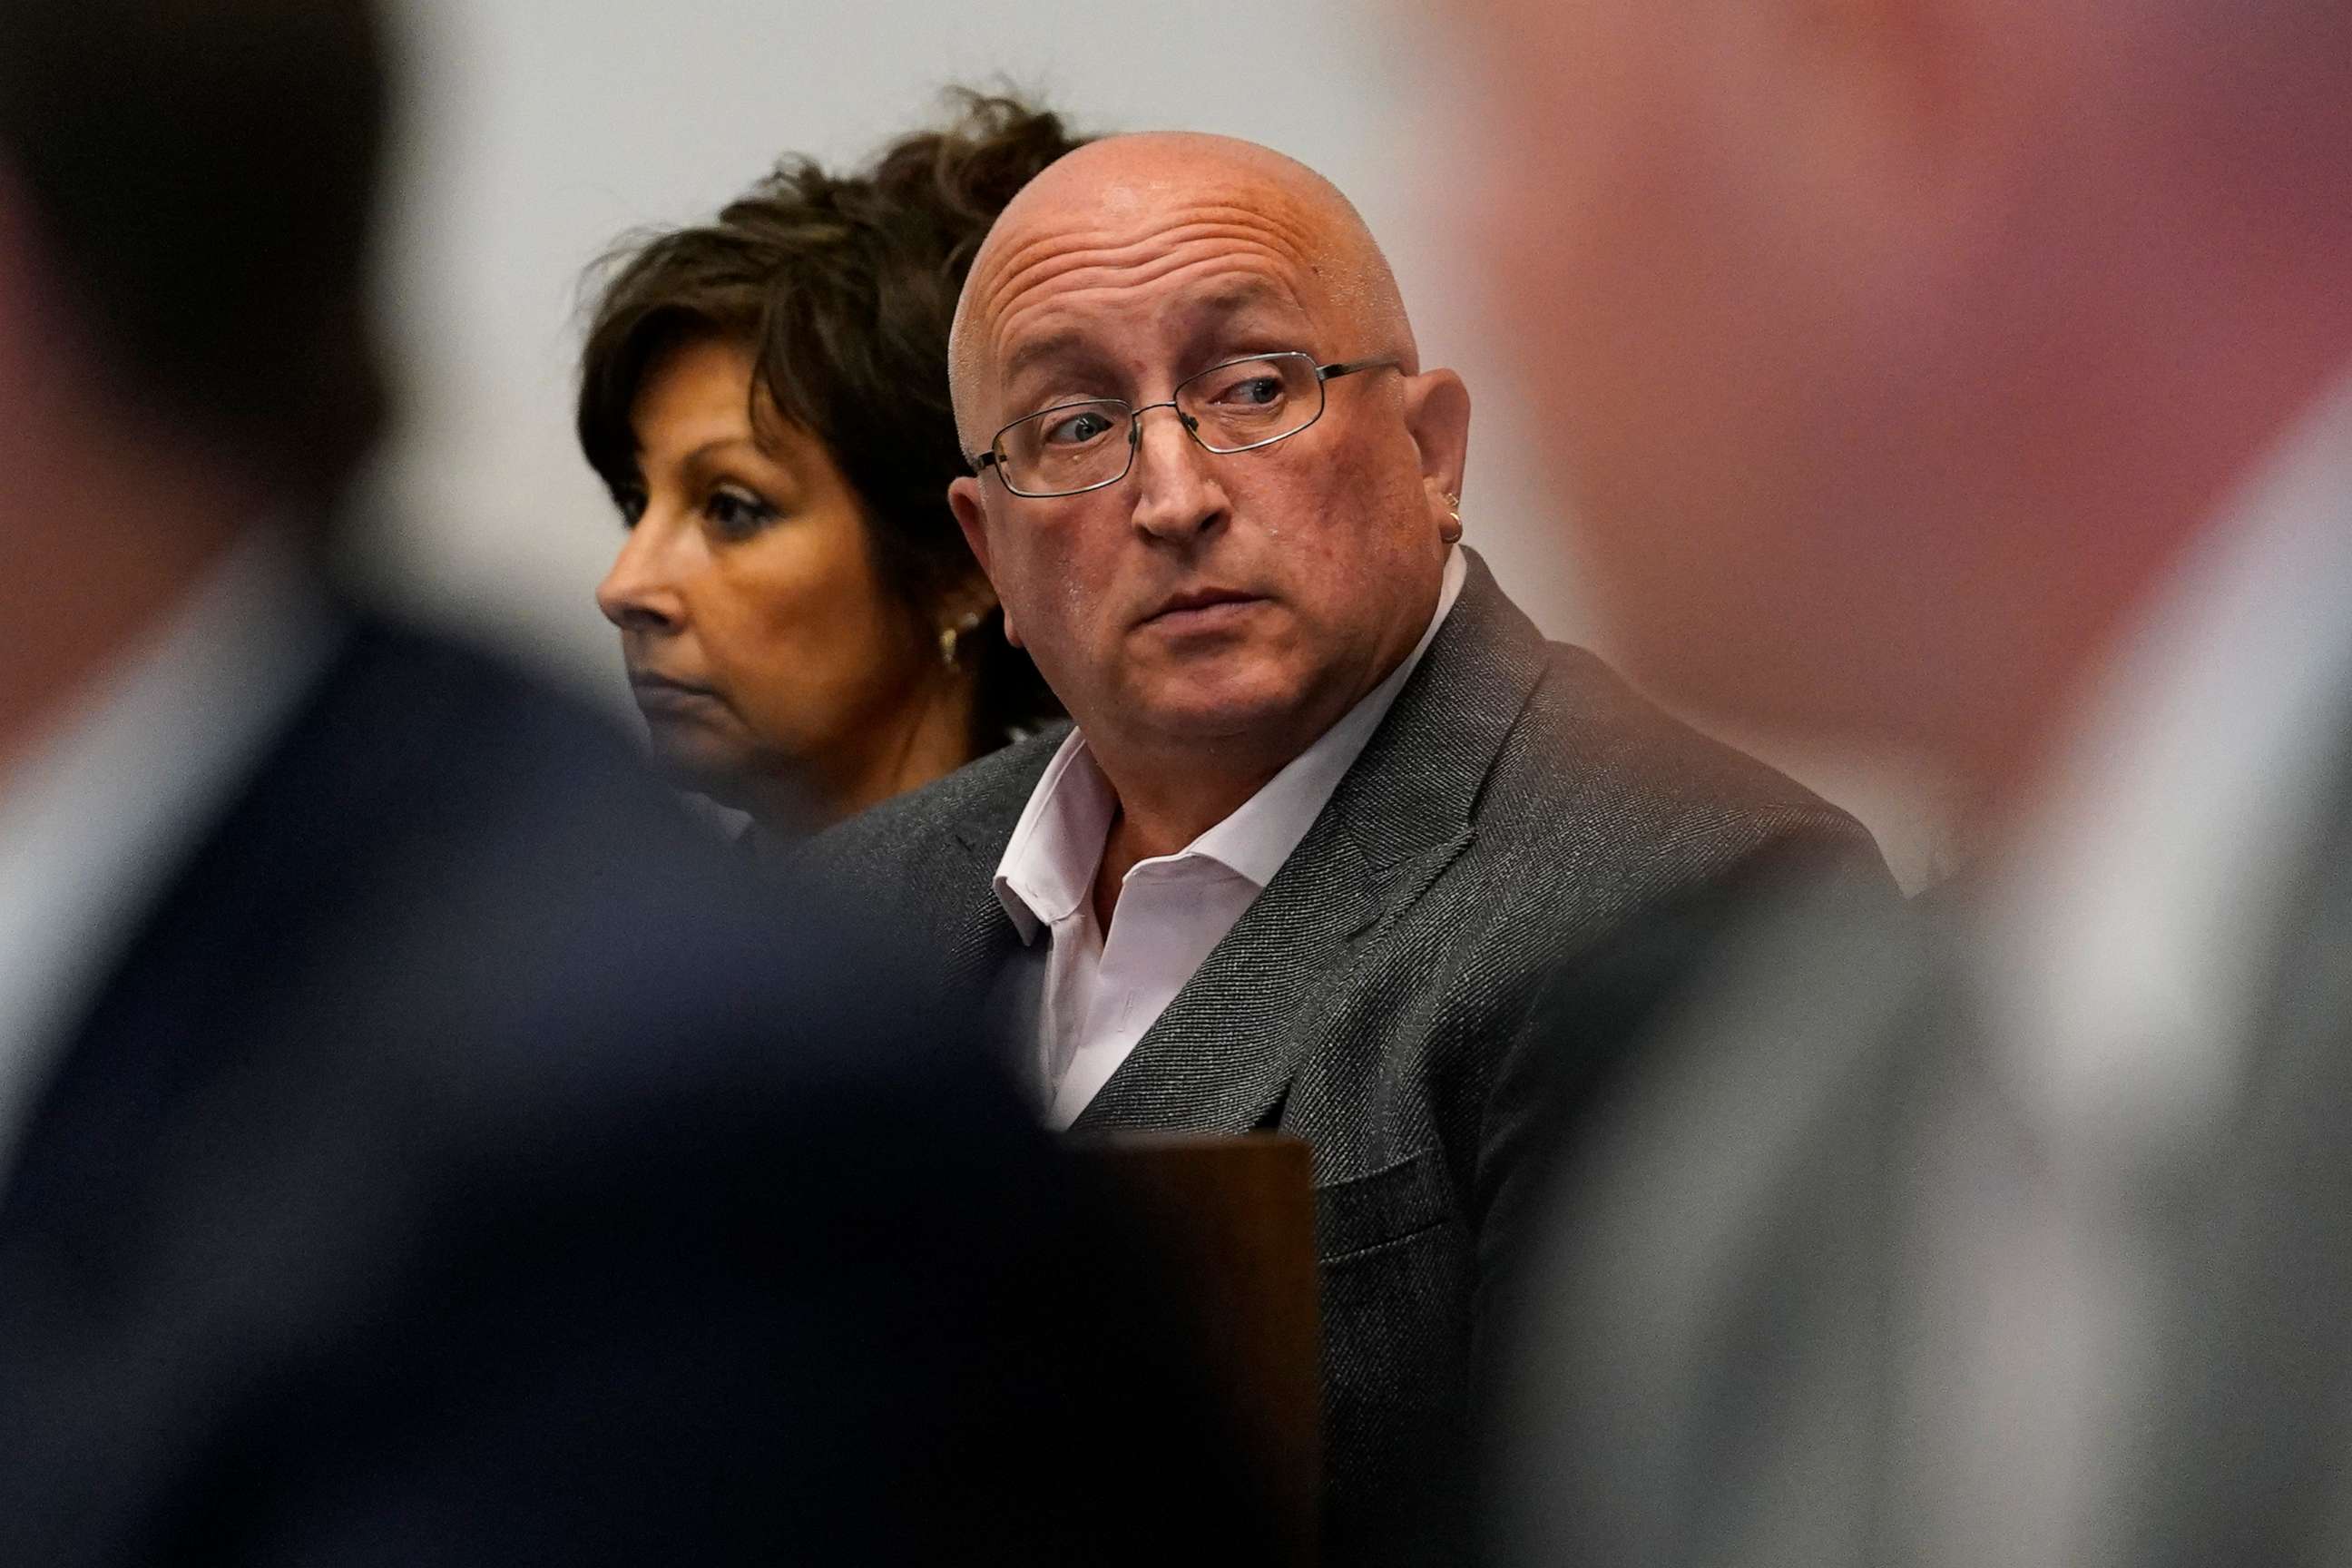 PHOTO: Robert E. Crimo III's father Robert Crimo Jr., right, and mother Denise Pesina attend to a hearing for their son in Lake County court on Aug. 3, 2022, in Waukegan, Ill.